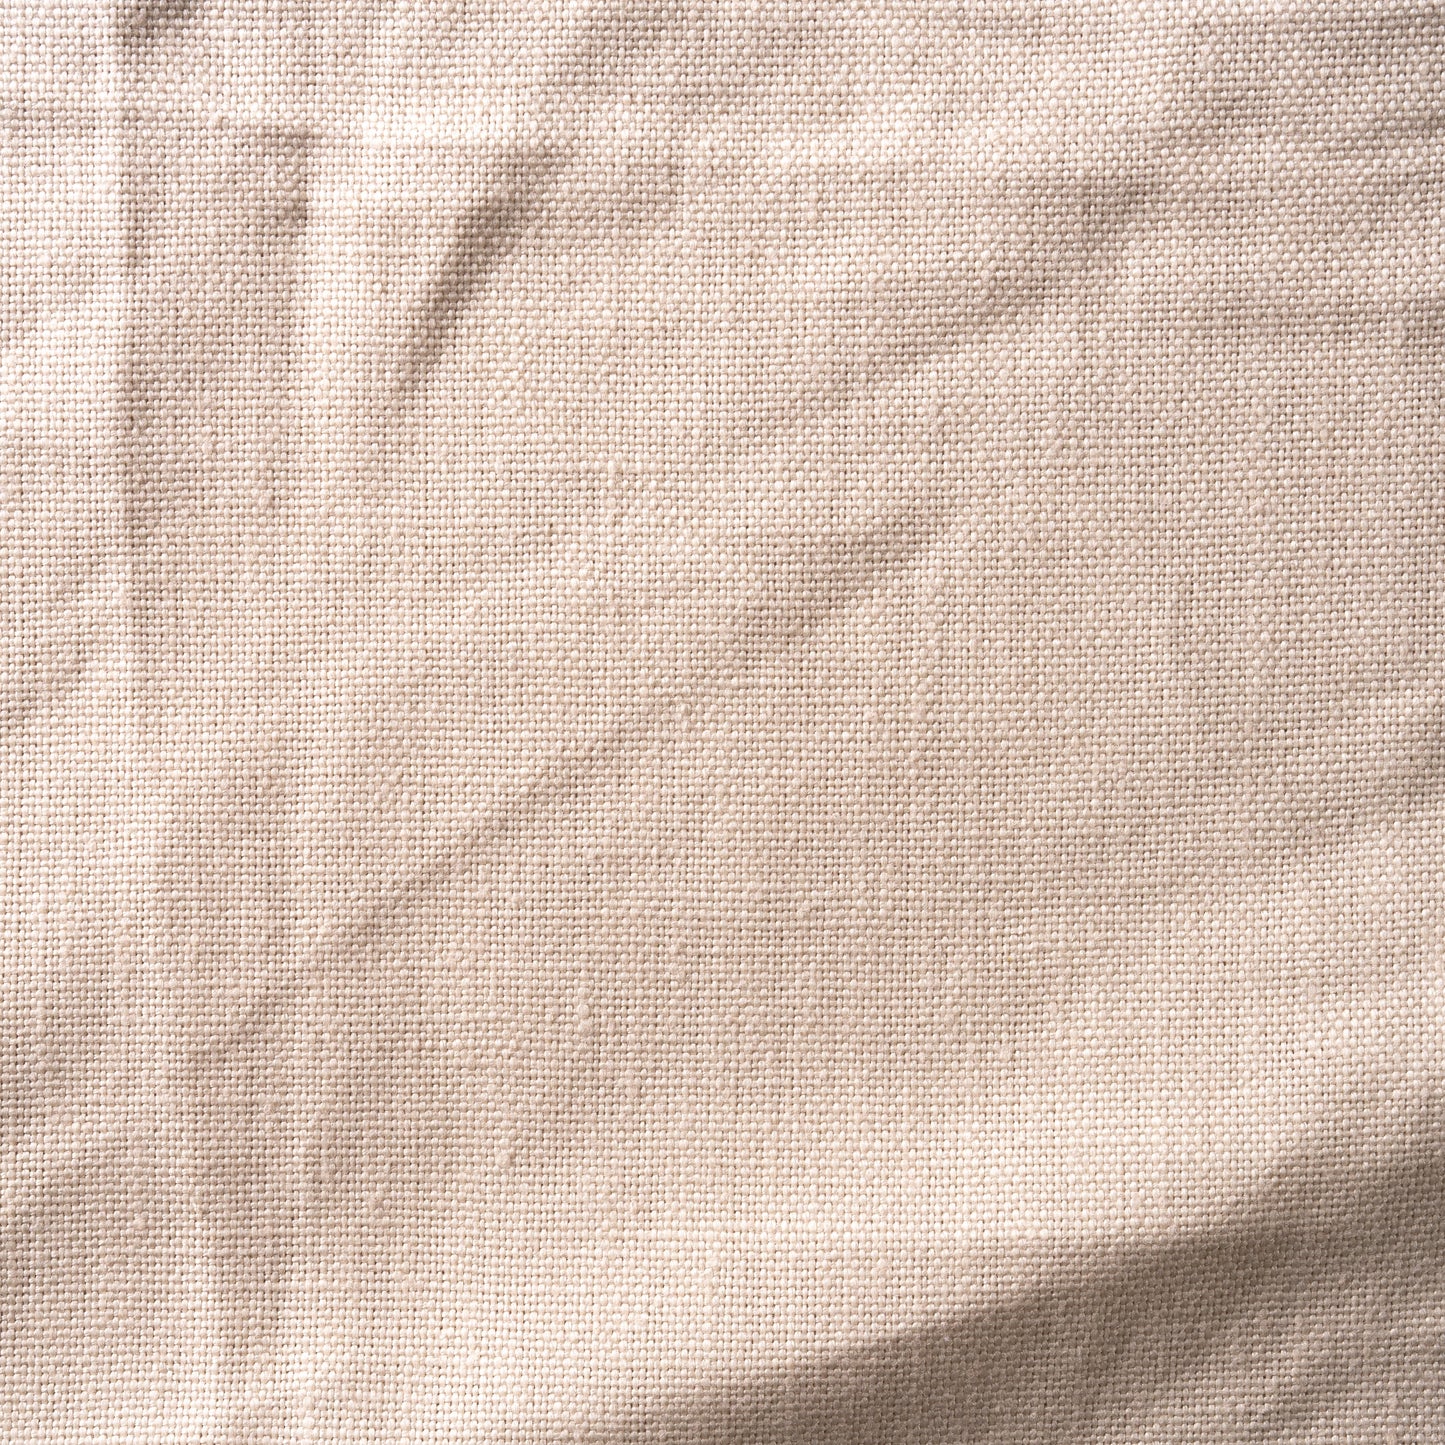 12 oz/sq yard 100% Upholstery/ Slipcover Weight Linen in Parchment